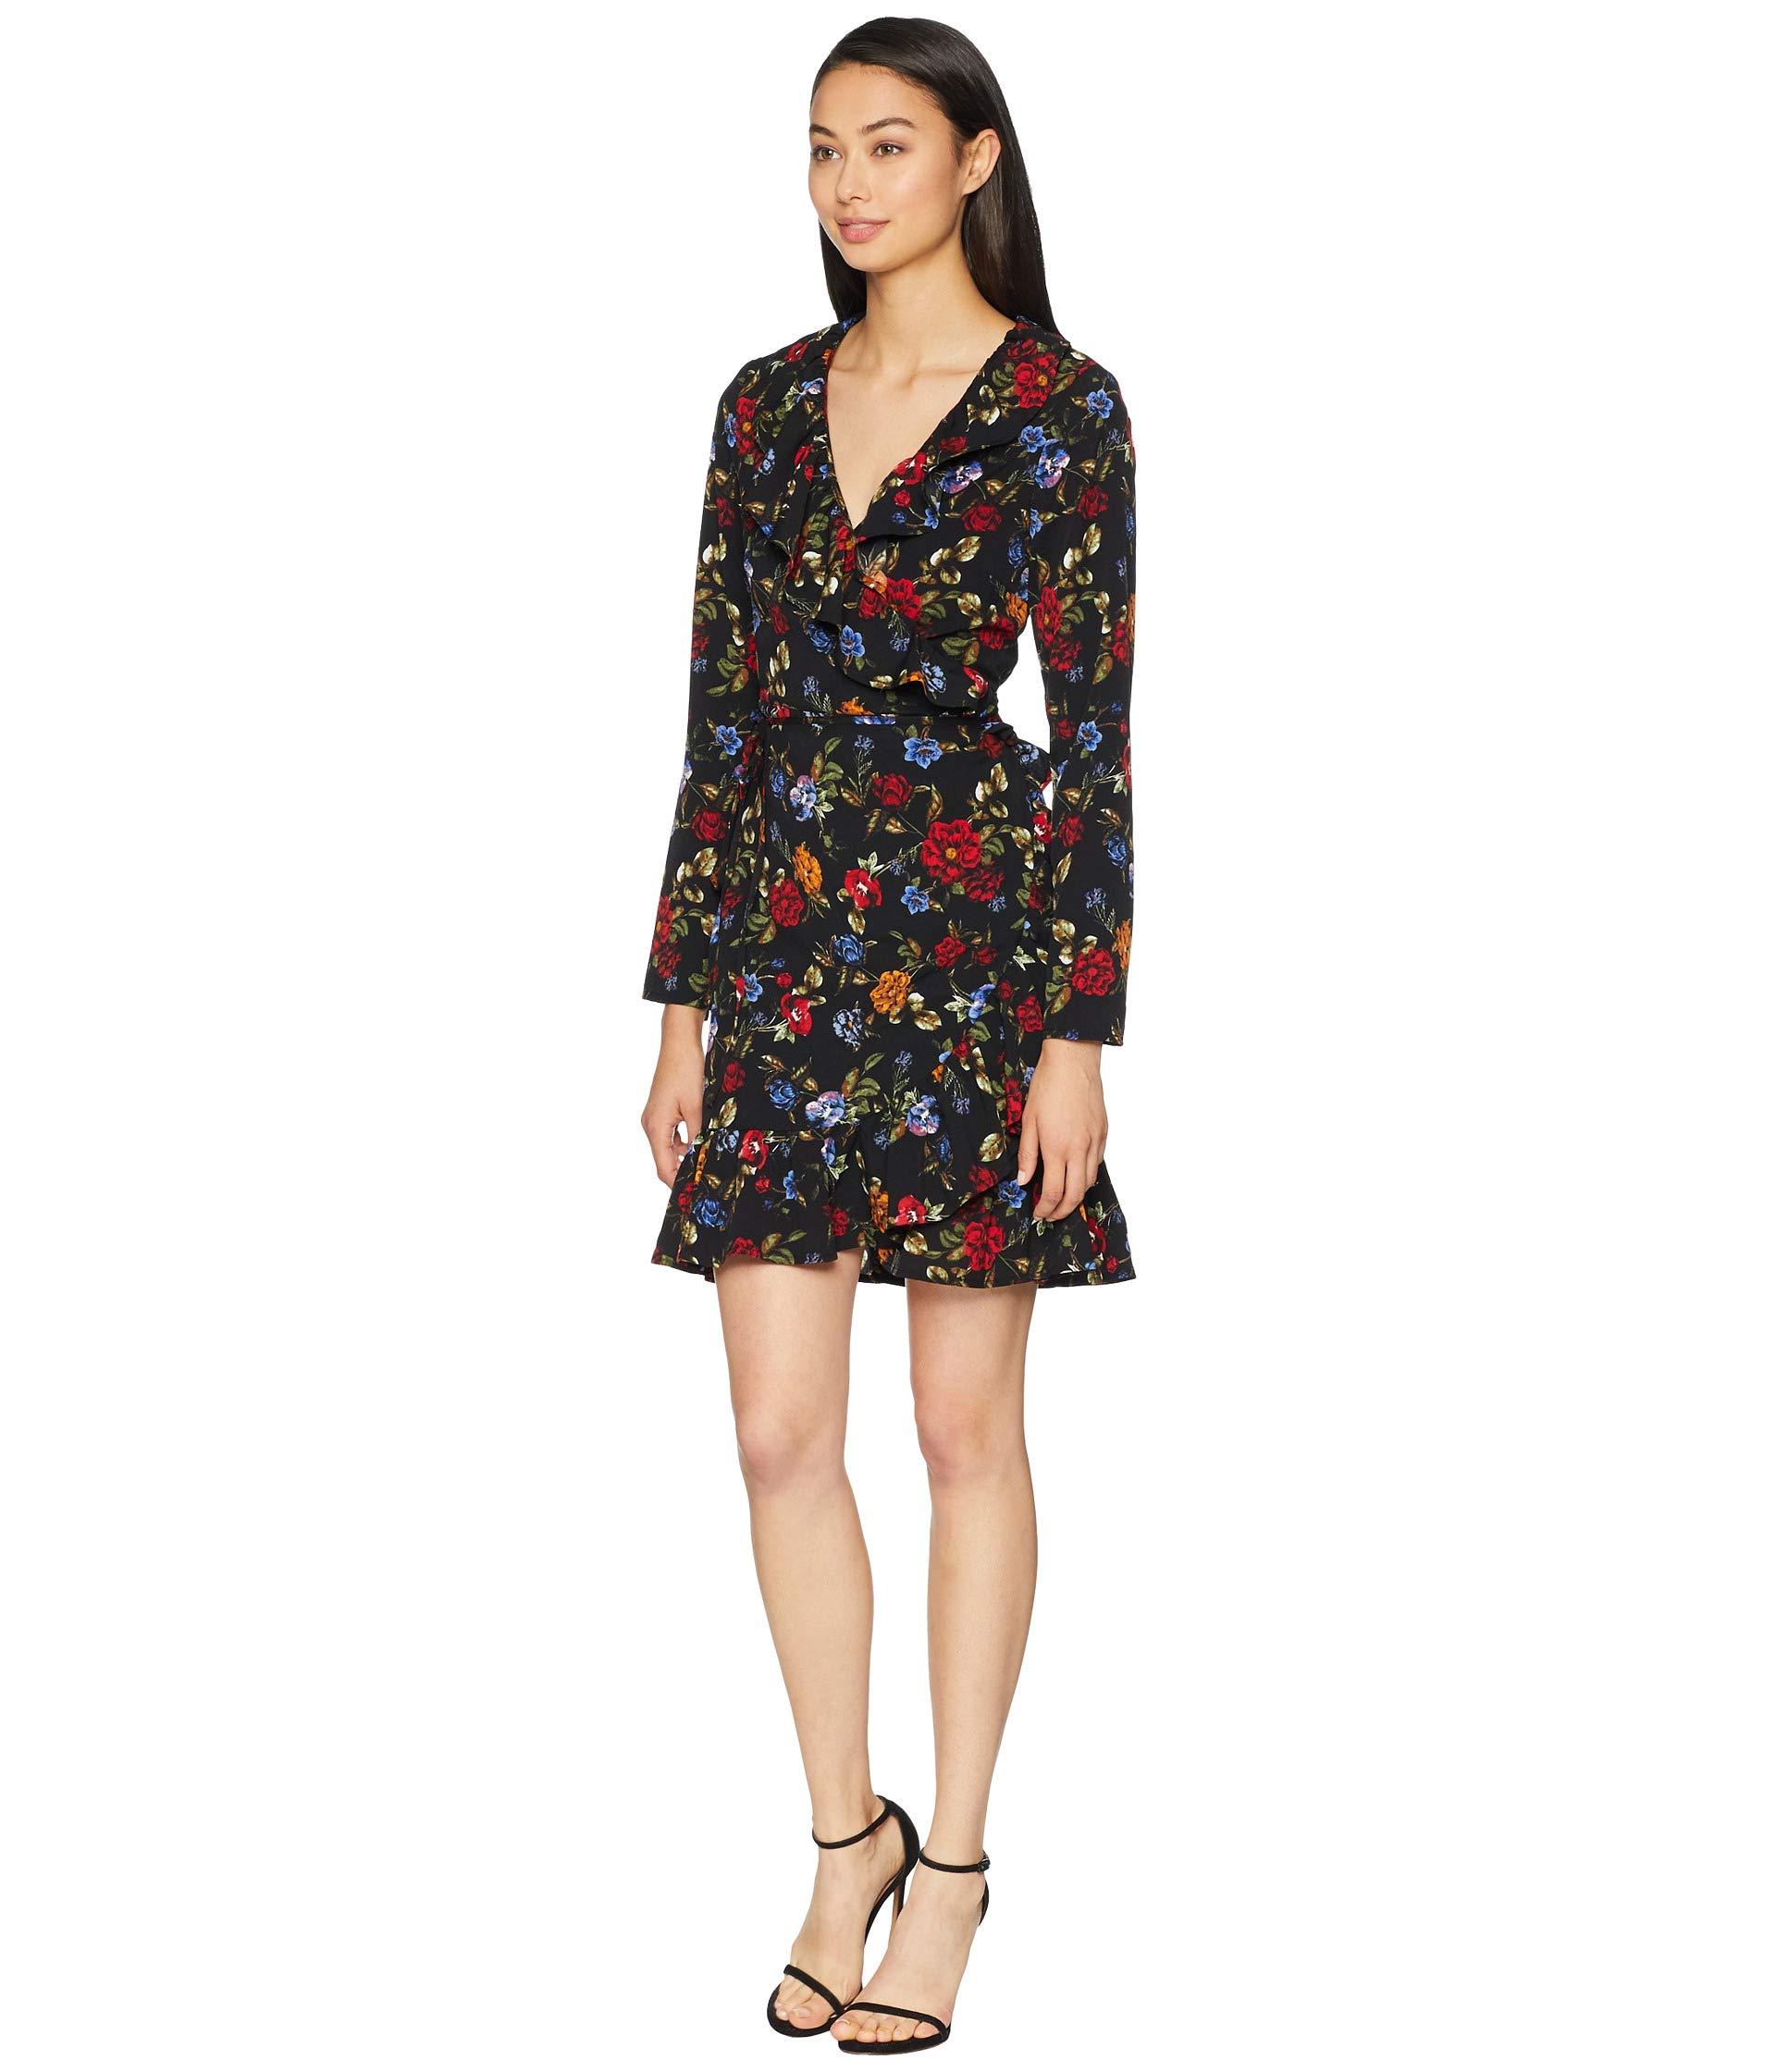 Kensie Synthetic Winter Floral Dress in Black Combo (Black) - Save 84% |  Lyst